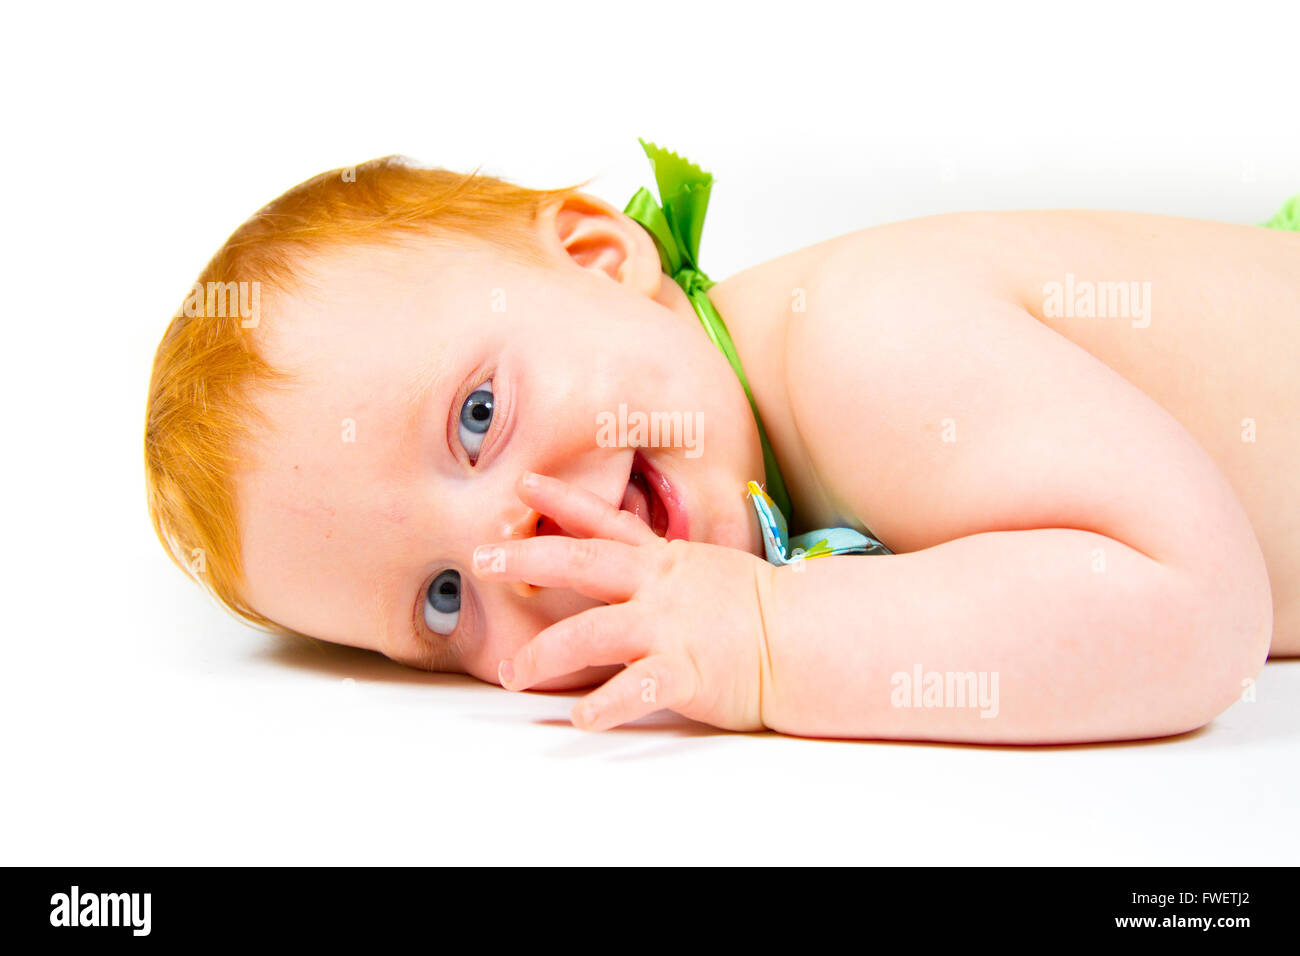 A cute one year old boy lays in the studio against a white background looking cute and happy. Stock Photo